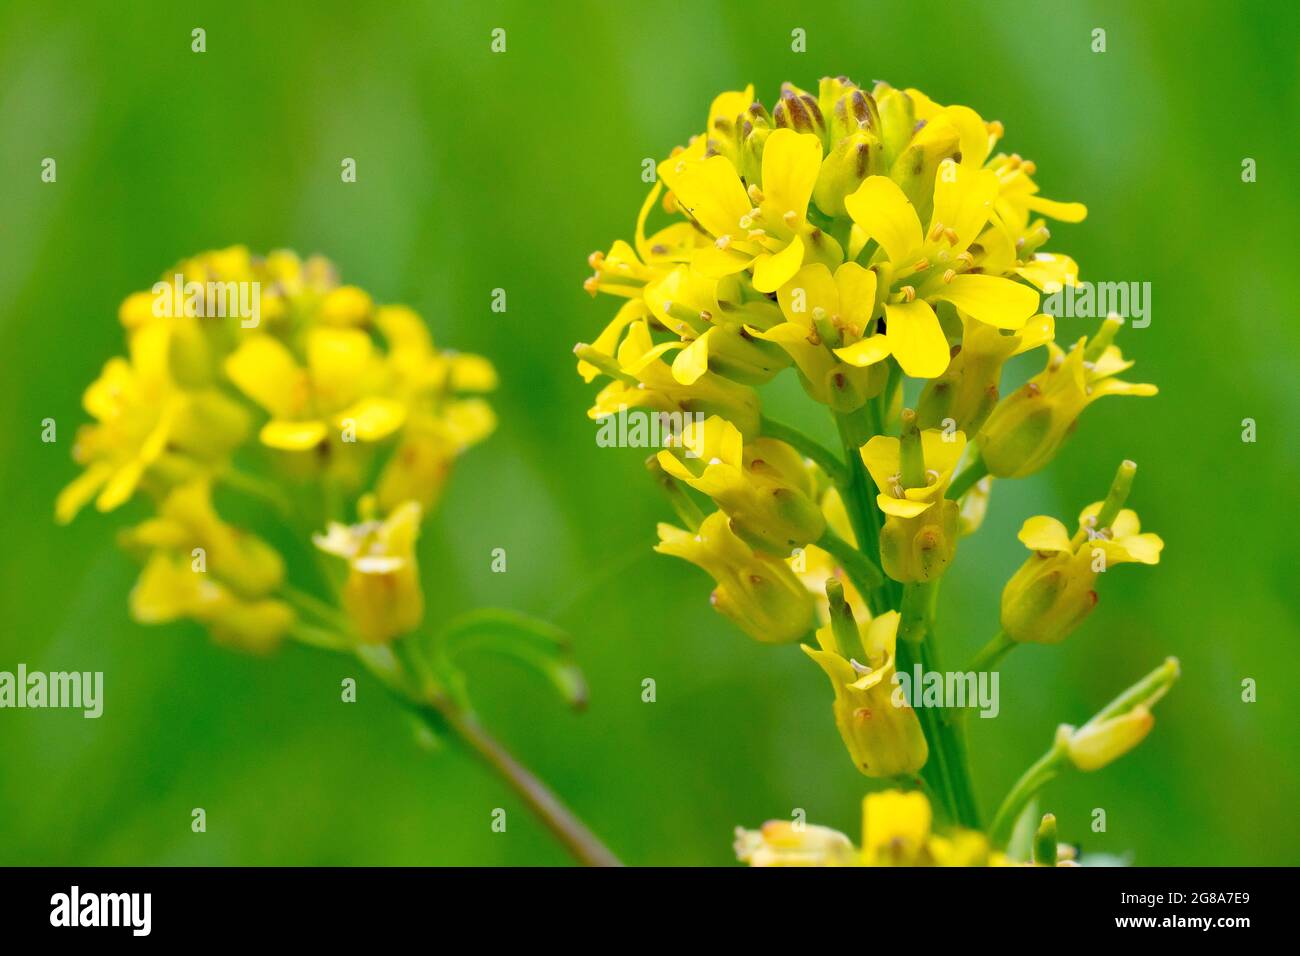 Creeping Yellow-cress (rorippa sylvestris), close up showing the small yellow flowers on the uppermost flowerhead of the plant. Stock Photo